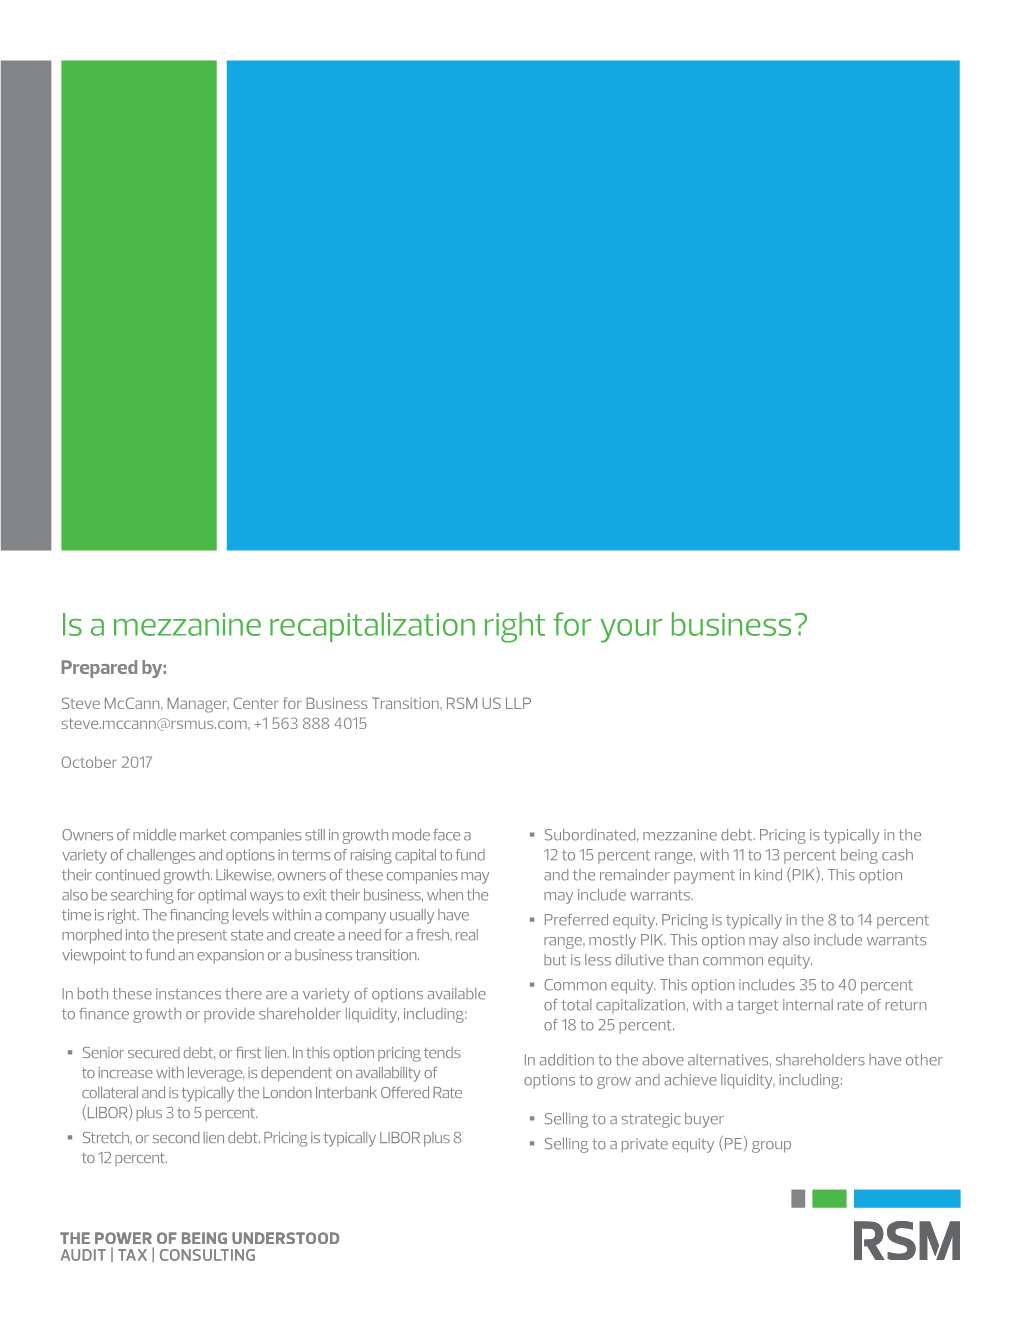 Is a Mezzanine Recapitalization Right for Your Business? Prepared By